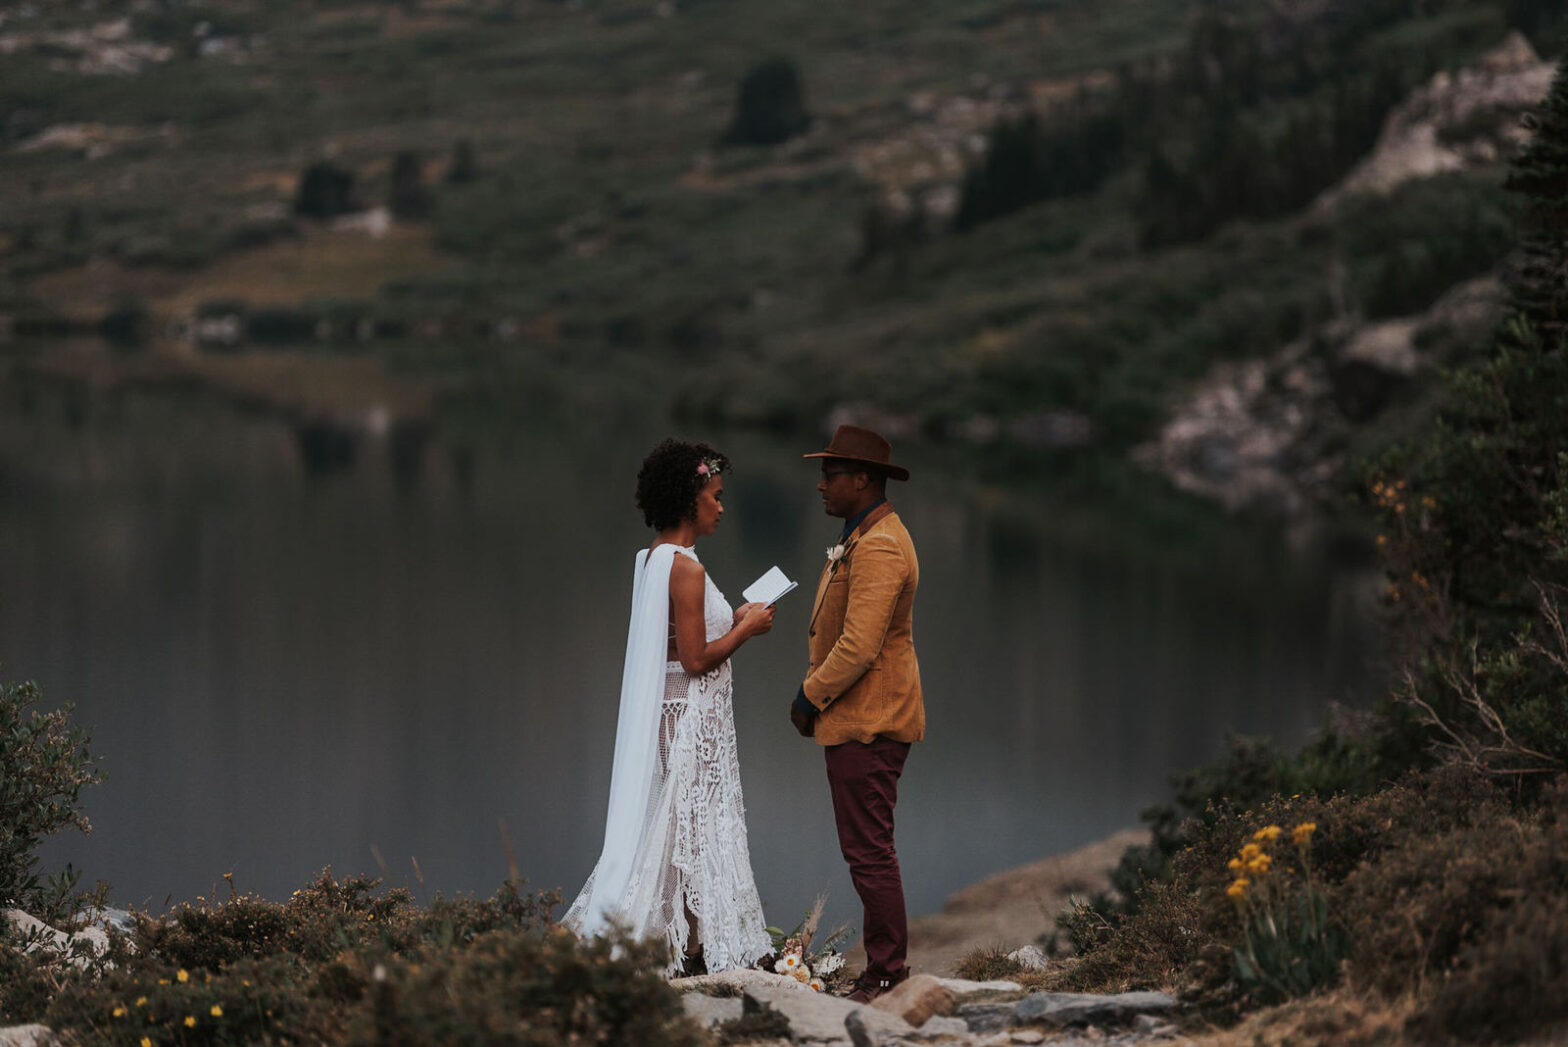 a bride with a cape wedding dress and groom with untraditional suit standing by mountains and water during elopement